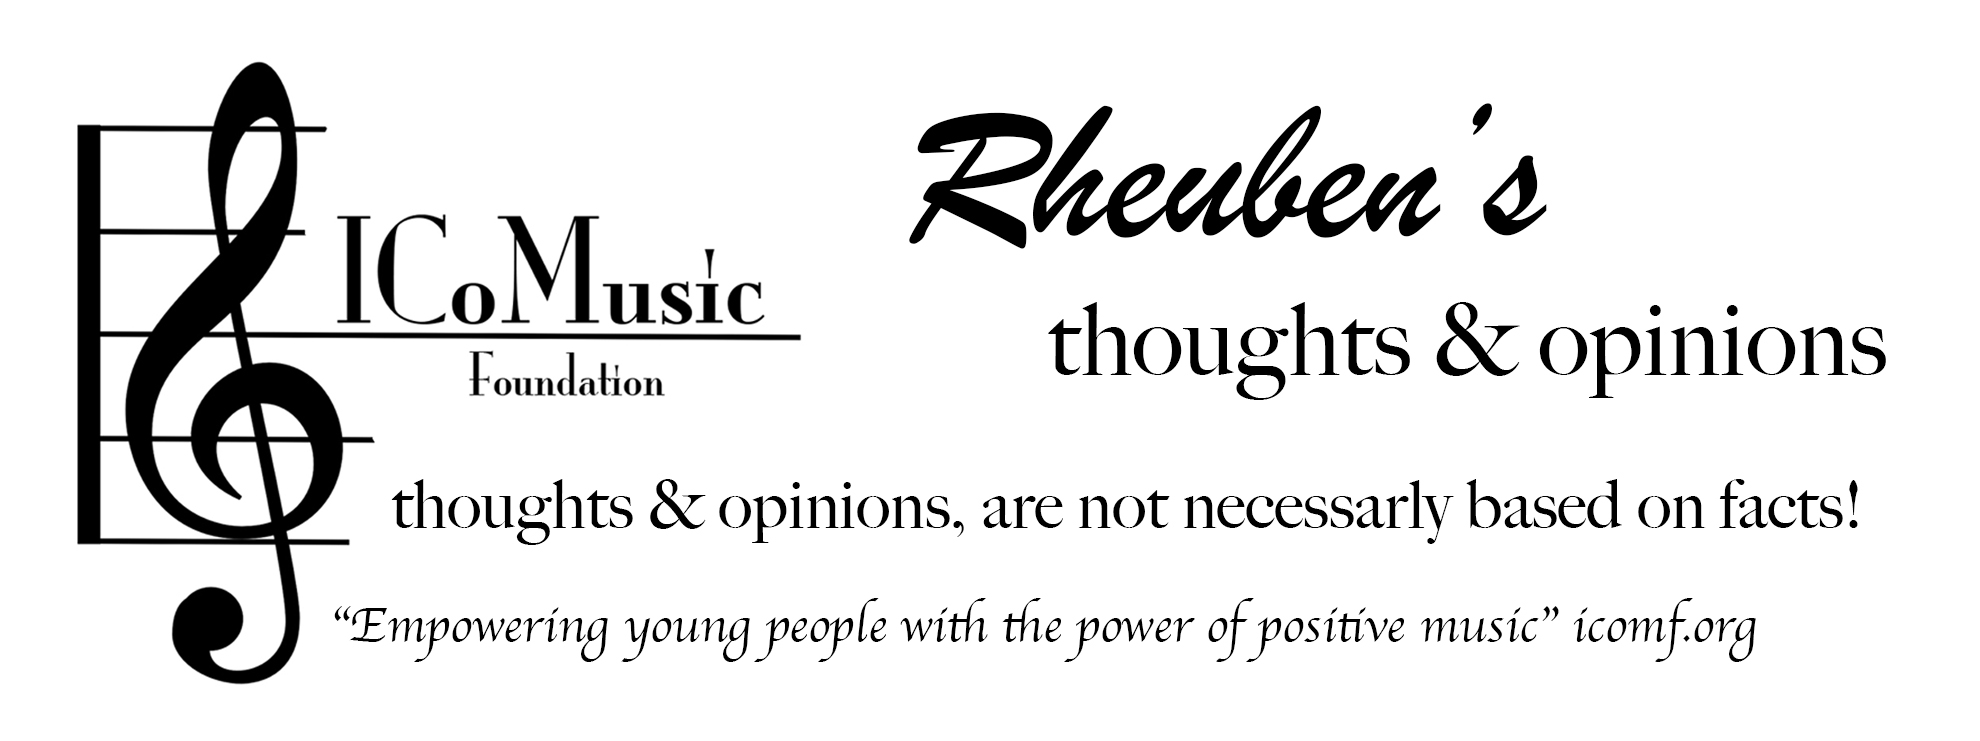 Rheuben's thoughts & opinions Blog Banner